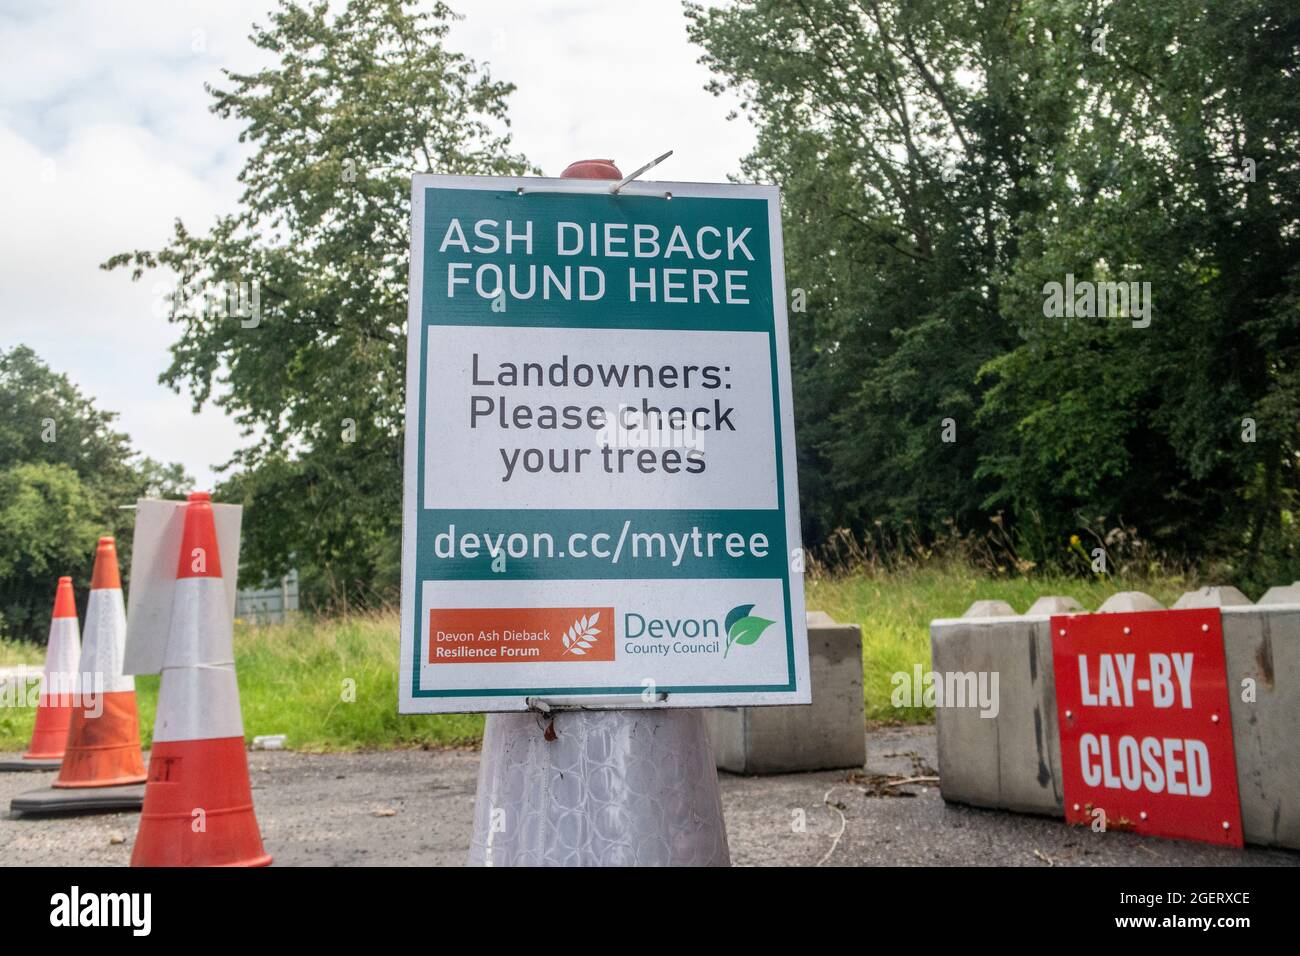 Ash dieback (chalara fraxinea) closes a layby  near Sidmouth, Devon, helping prevent further spread of the ash tree disease. Stock Photo